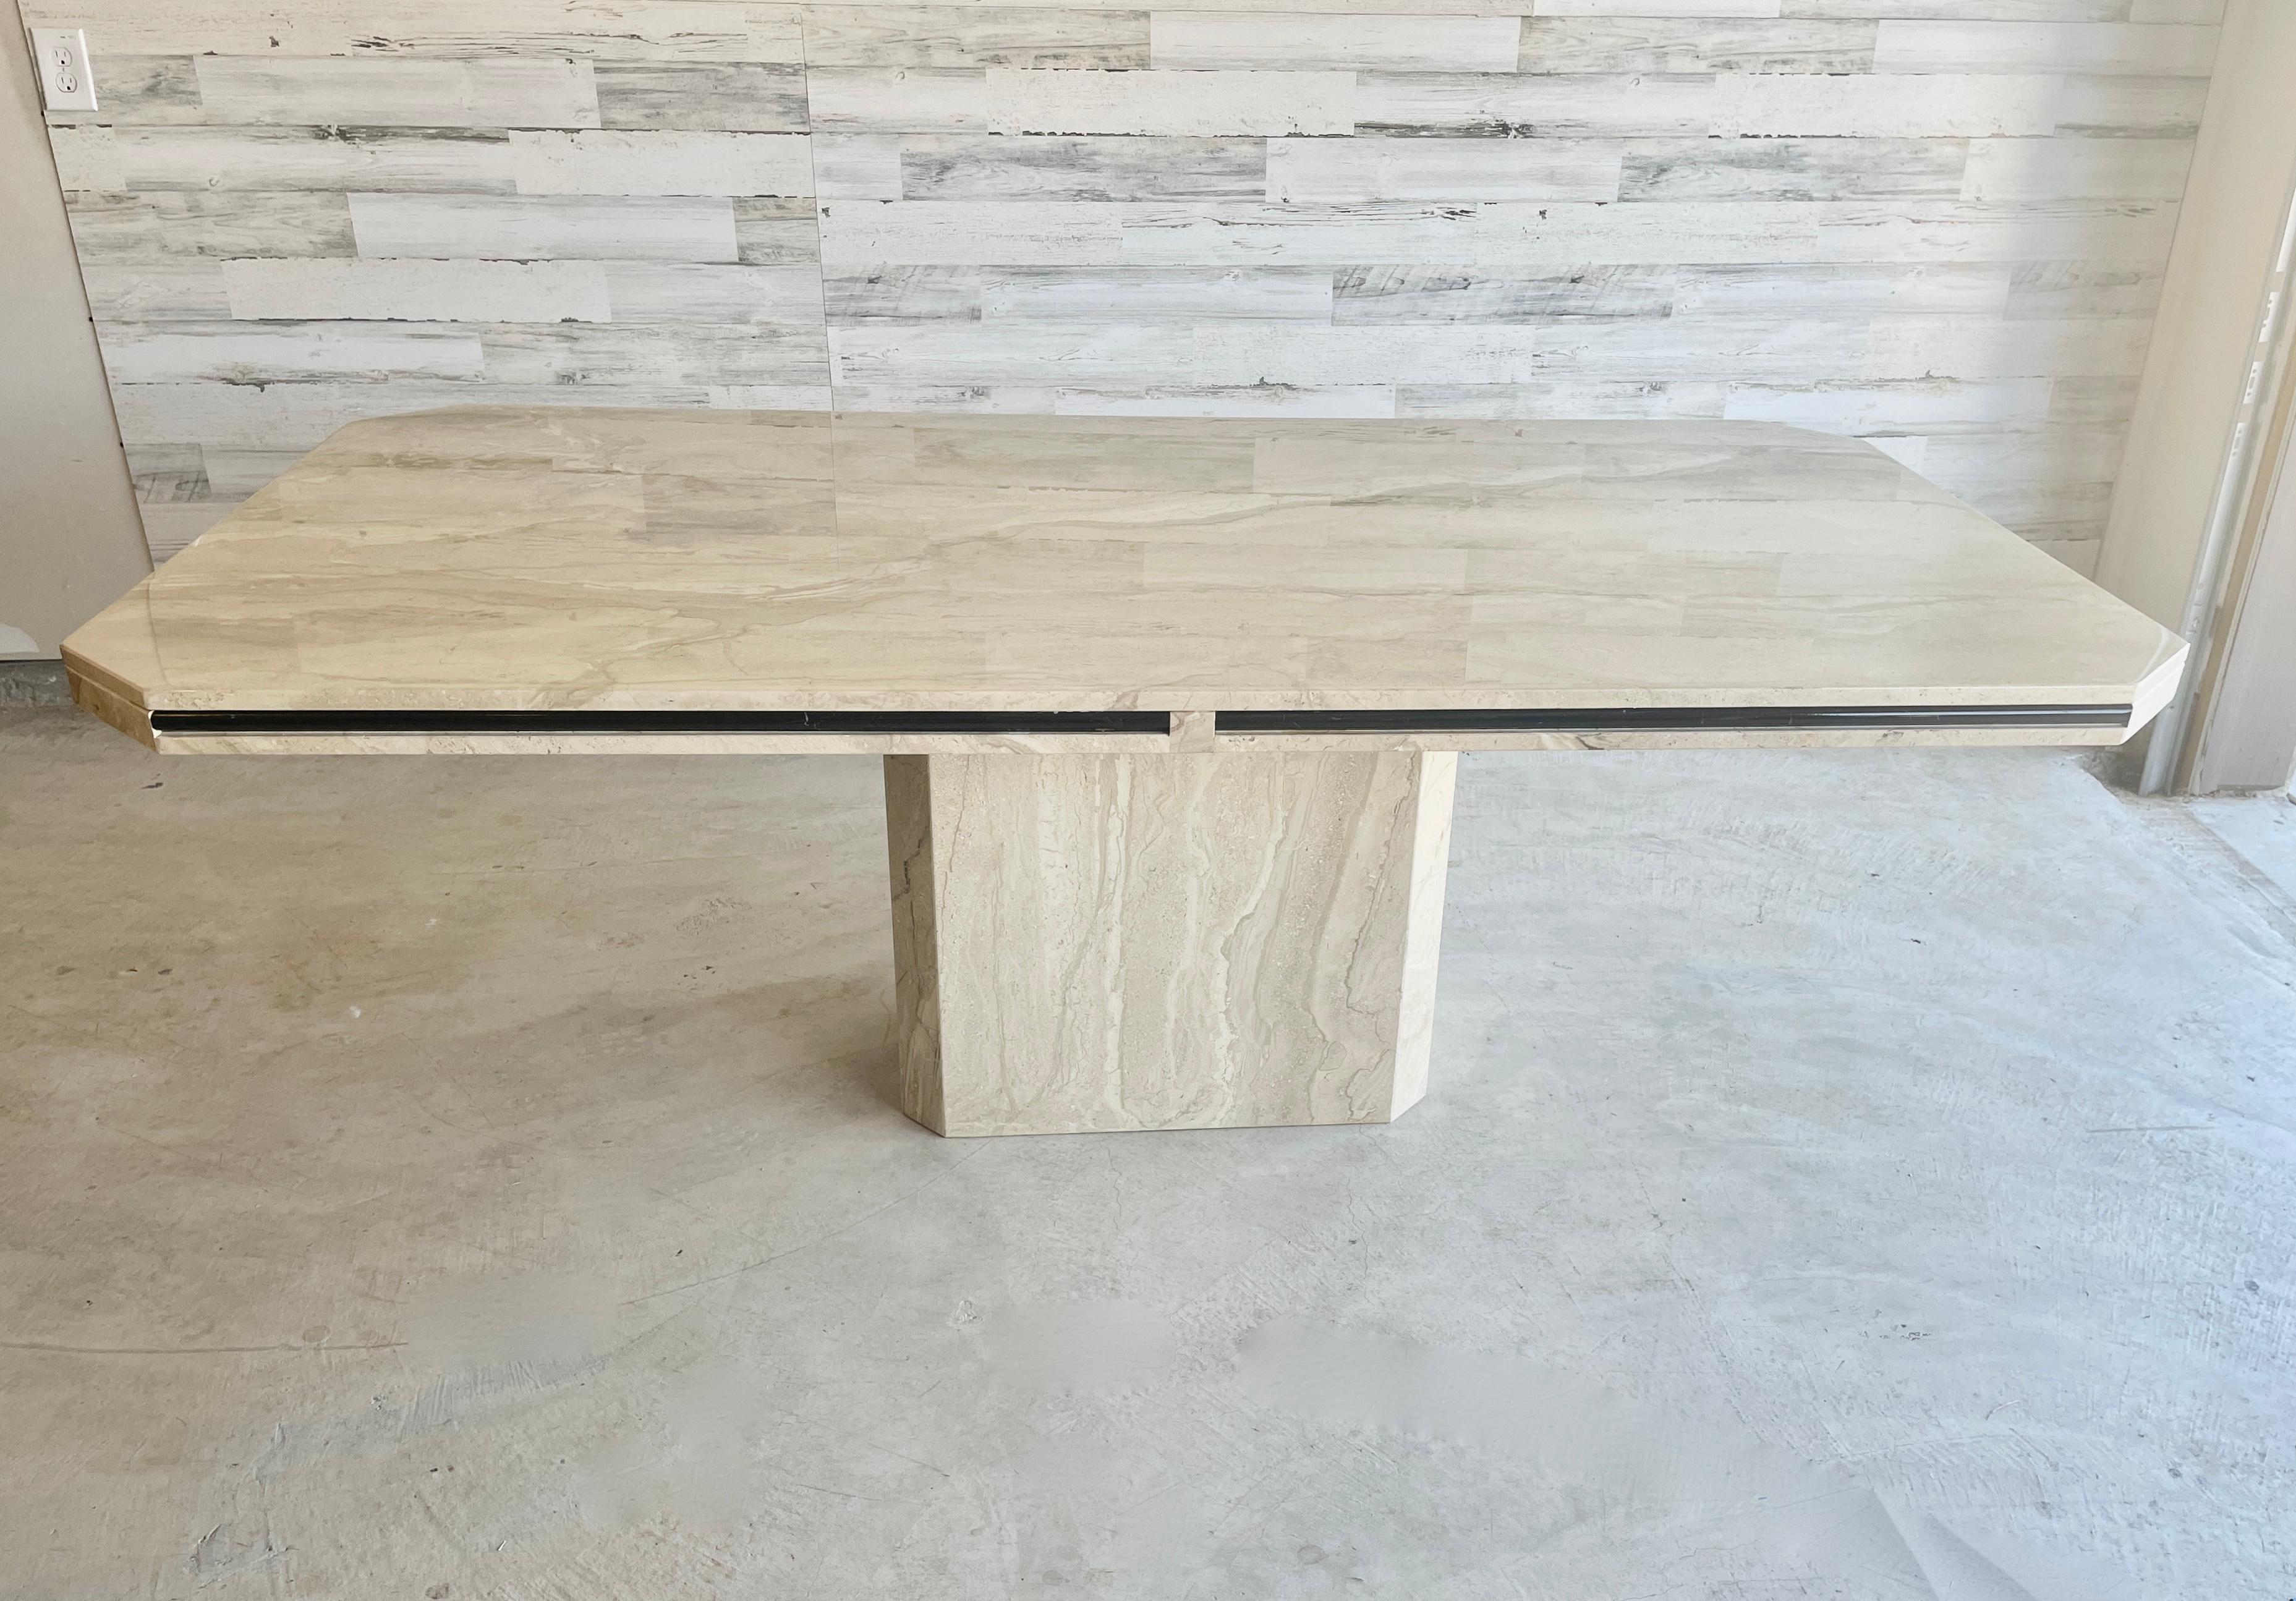 1980s Travertine dining table with black marble trim around the rim. Mixed Tan and cream swirling with hints of light pink.